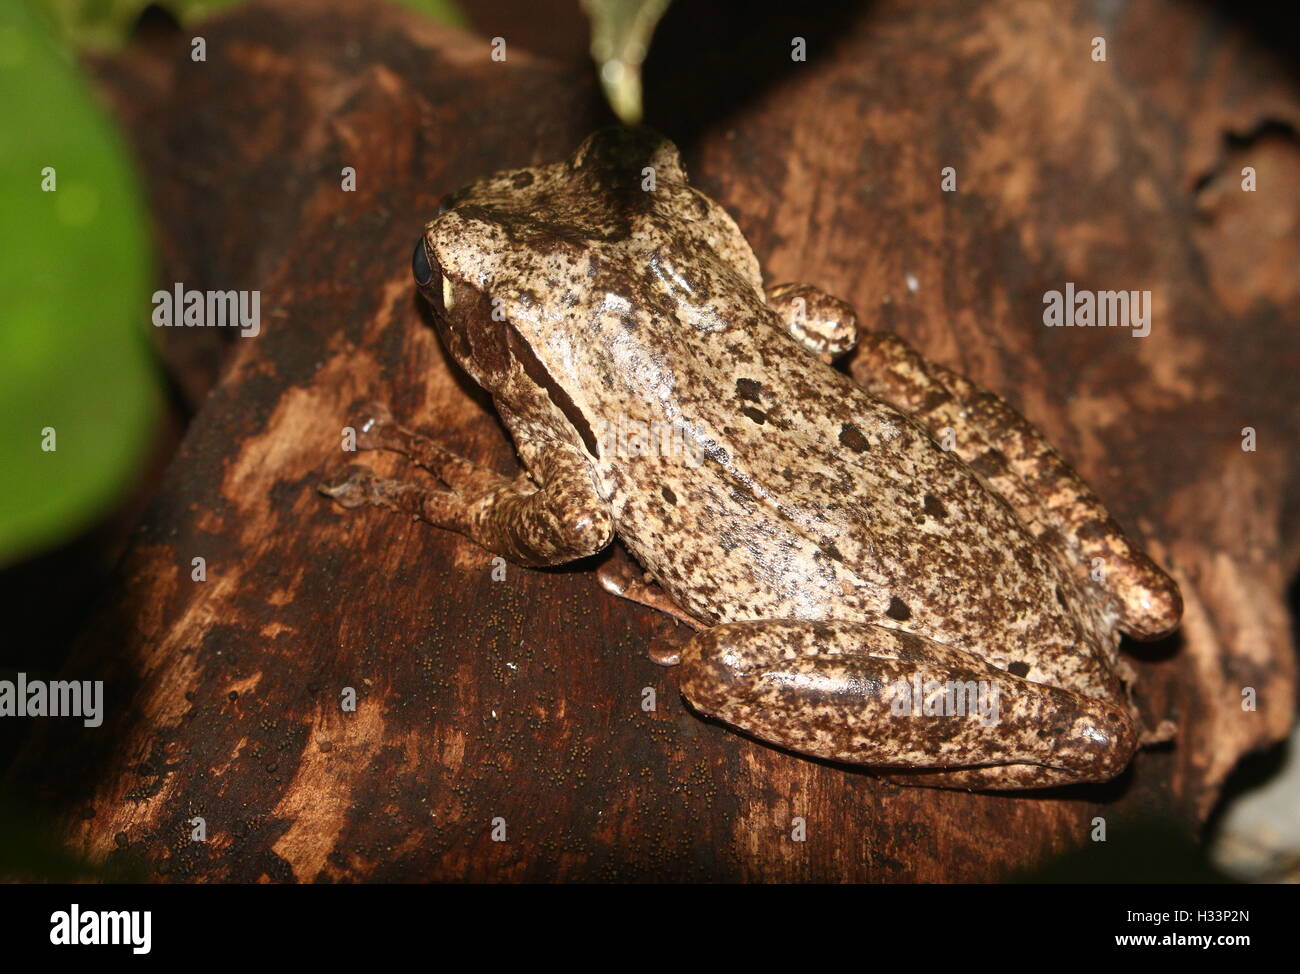 Asian Common Tree Frog or Four-lined tree frog (Polypedates leucomystax) Stock Photo